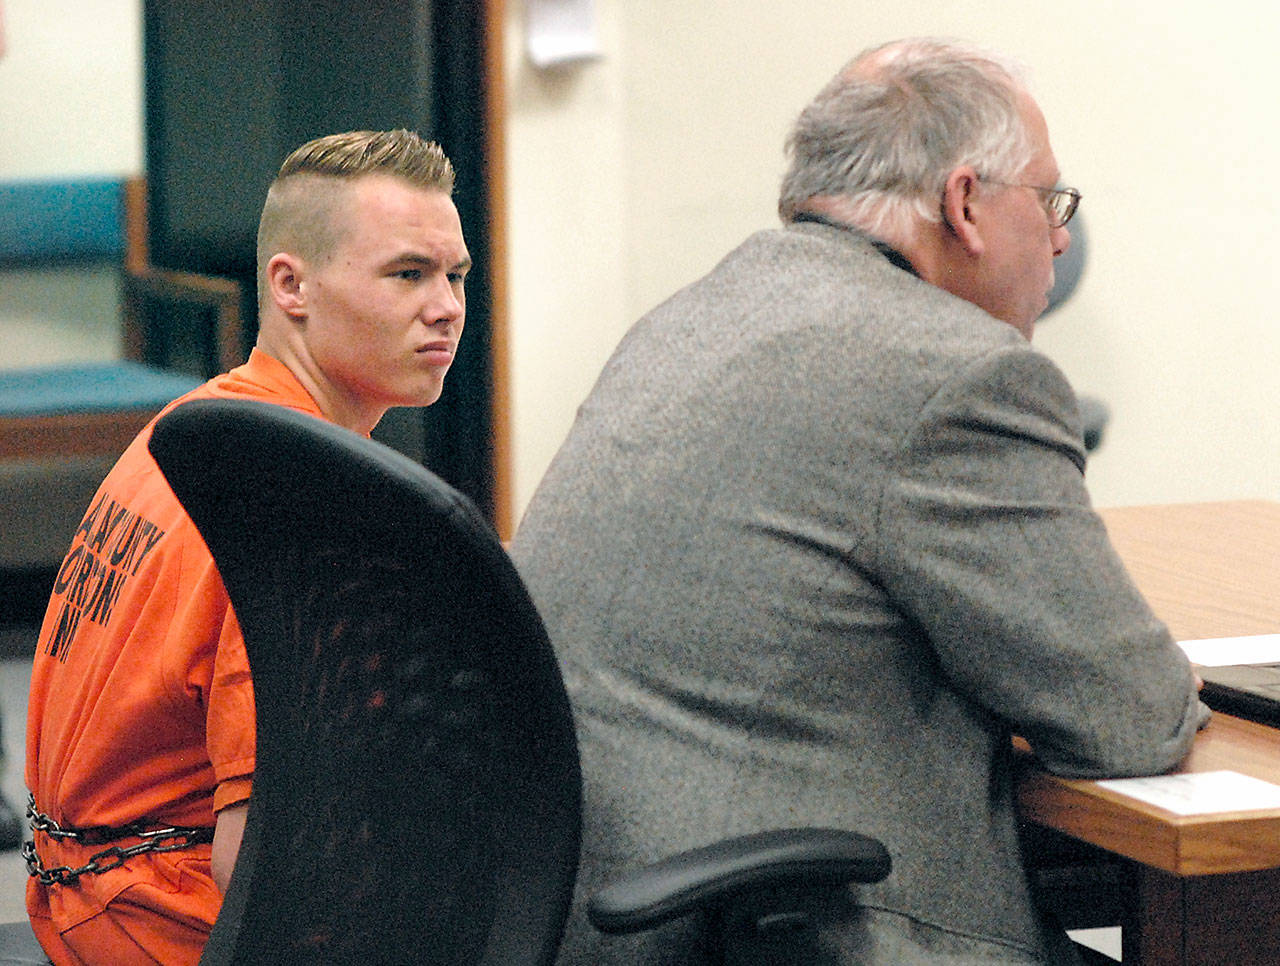 Benjamin Bonner looks at defense attorney Harry Gasnick during Bonner’s first appearance in Clallam County Superior Court on May 5 on charges of second-degree murder, animal curelty and theft of a motor vehicle. Keith Thorpe/Peninsula Daily News